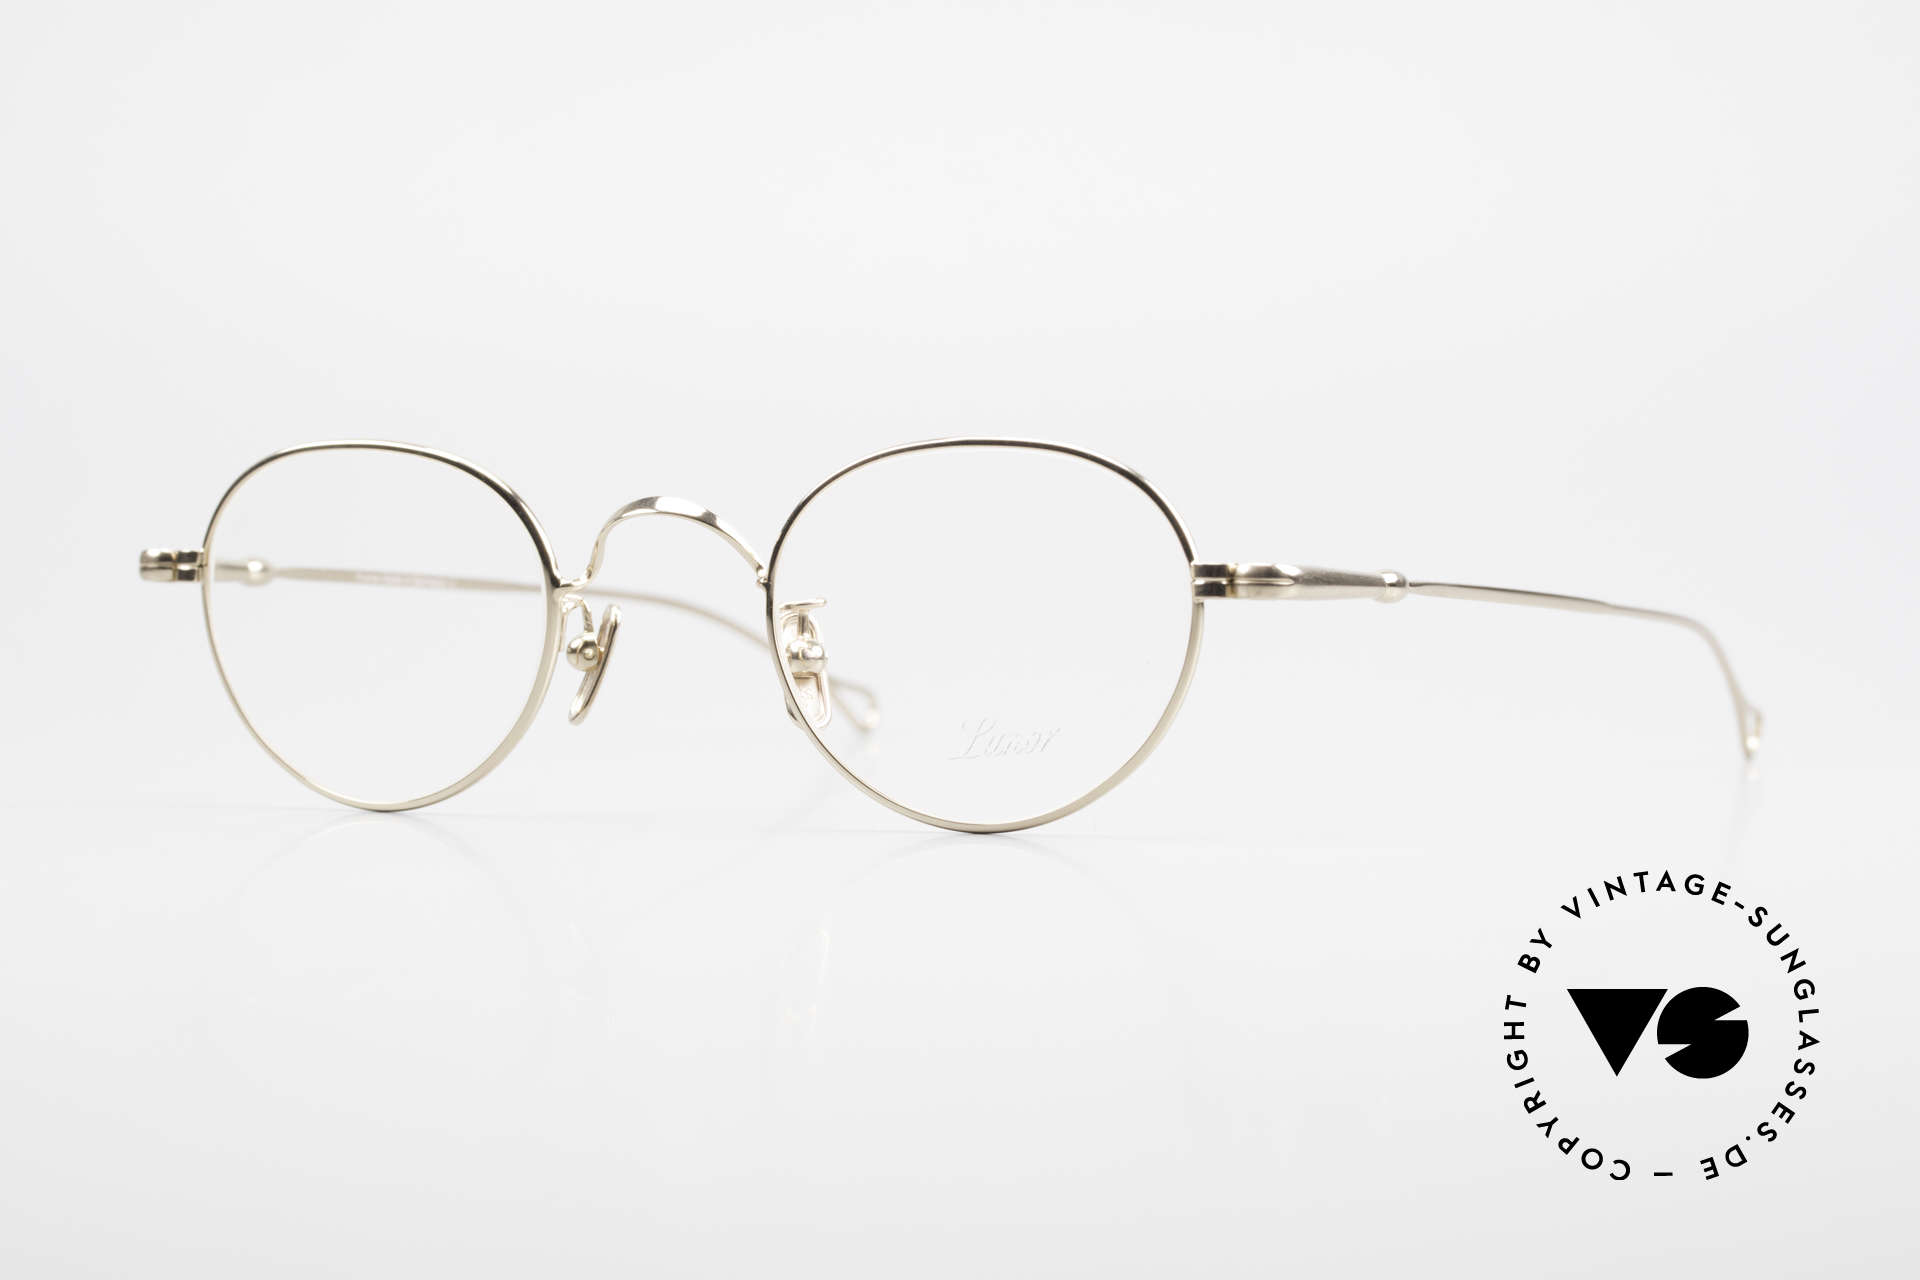 Lunor V 107 Panto Eyeglasses Gold Plated, LUNOR: honest craftsmanship with attention to details, Made for Men